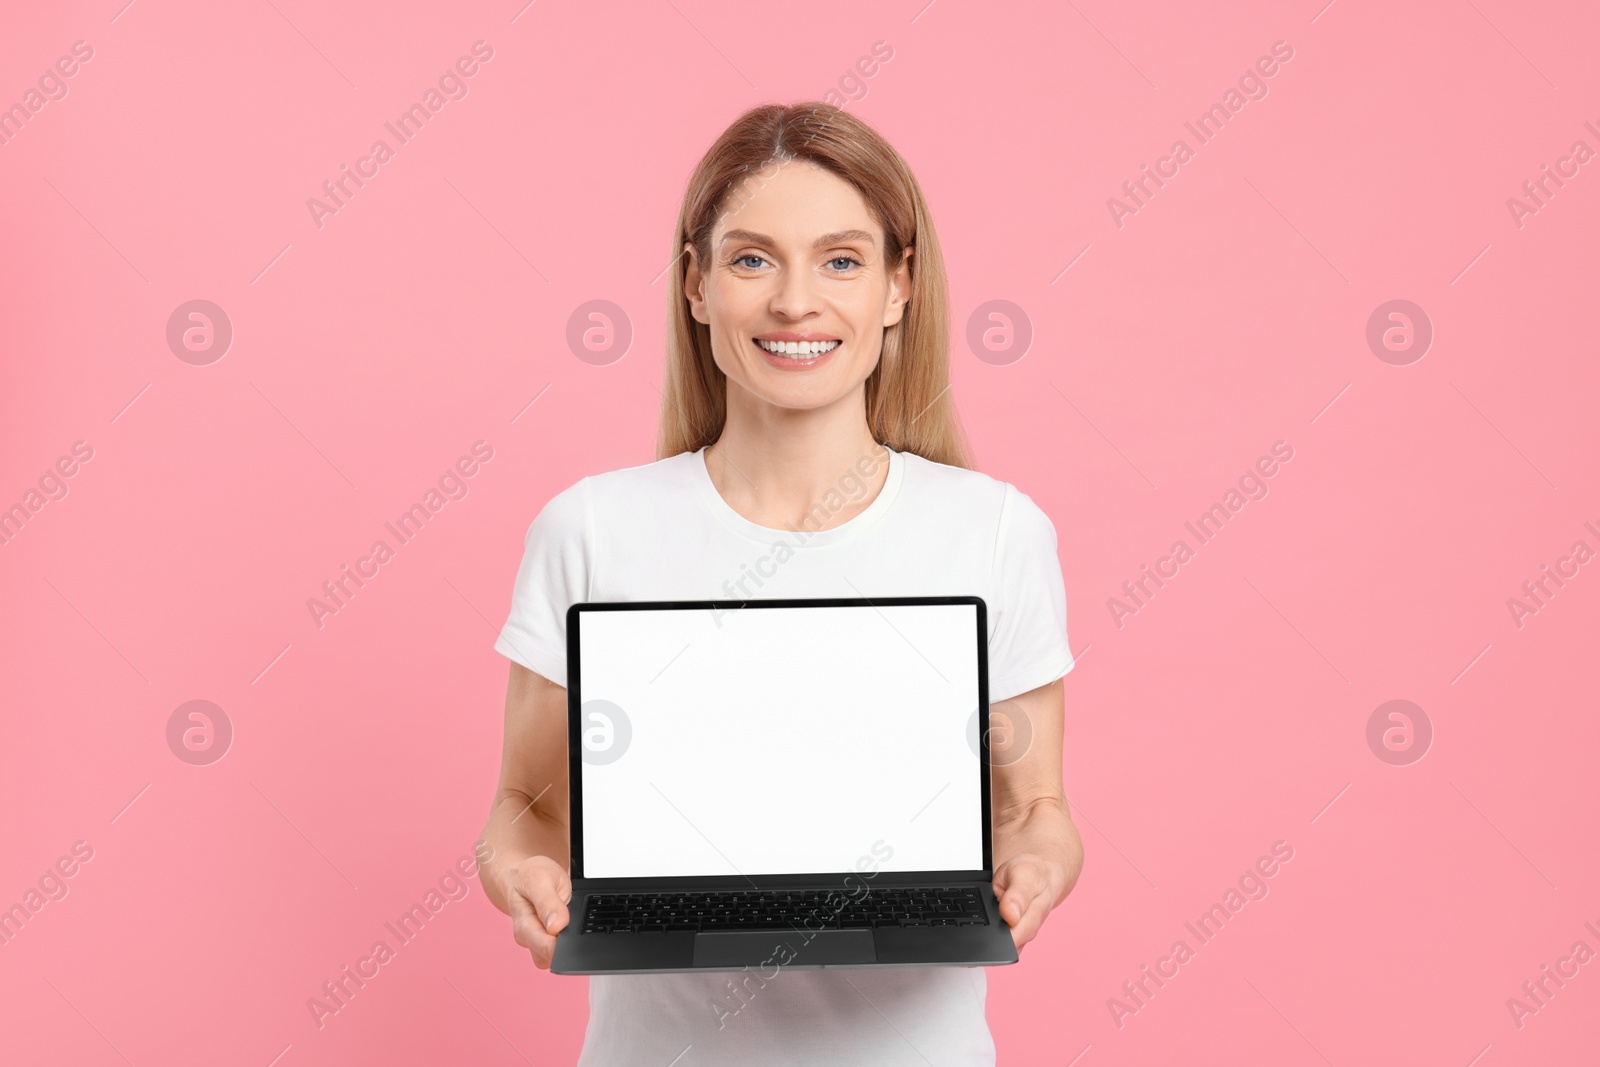 Photo of Happy woman showing laptop on pink background